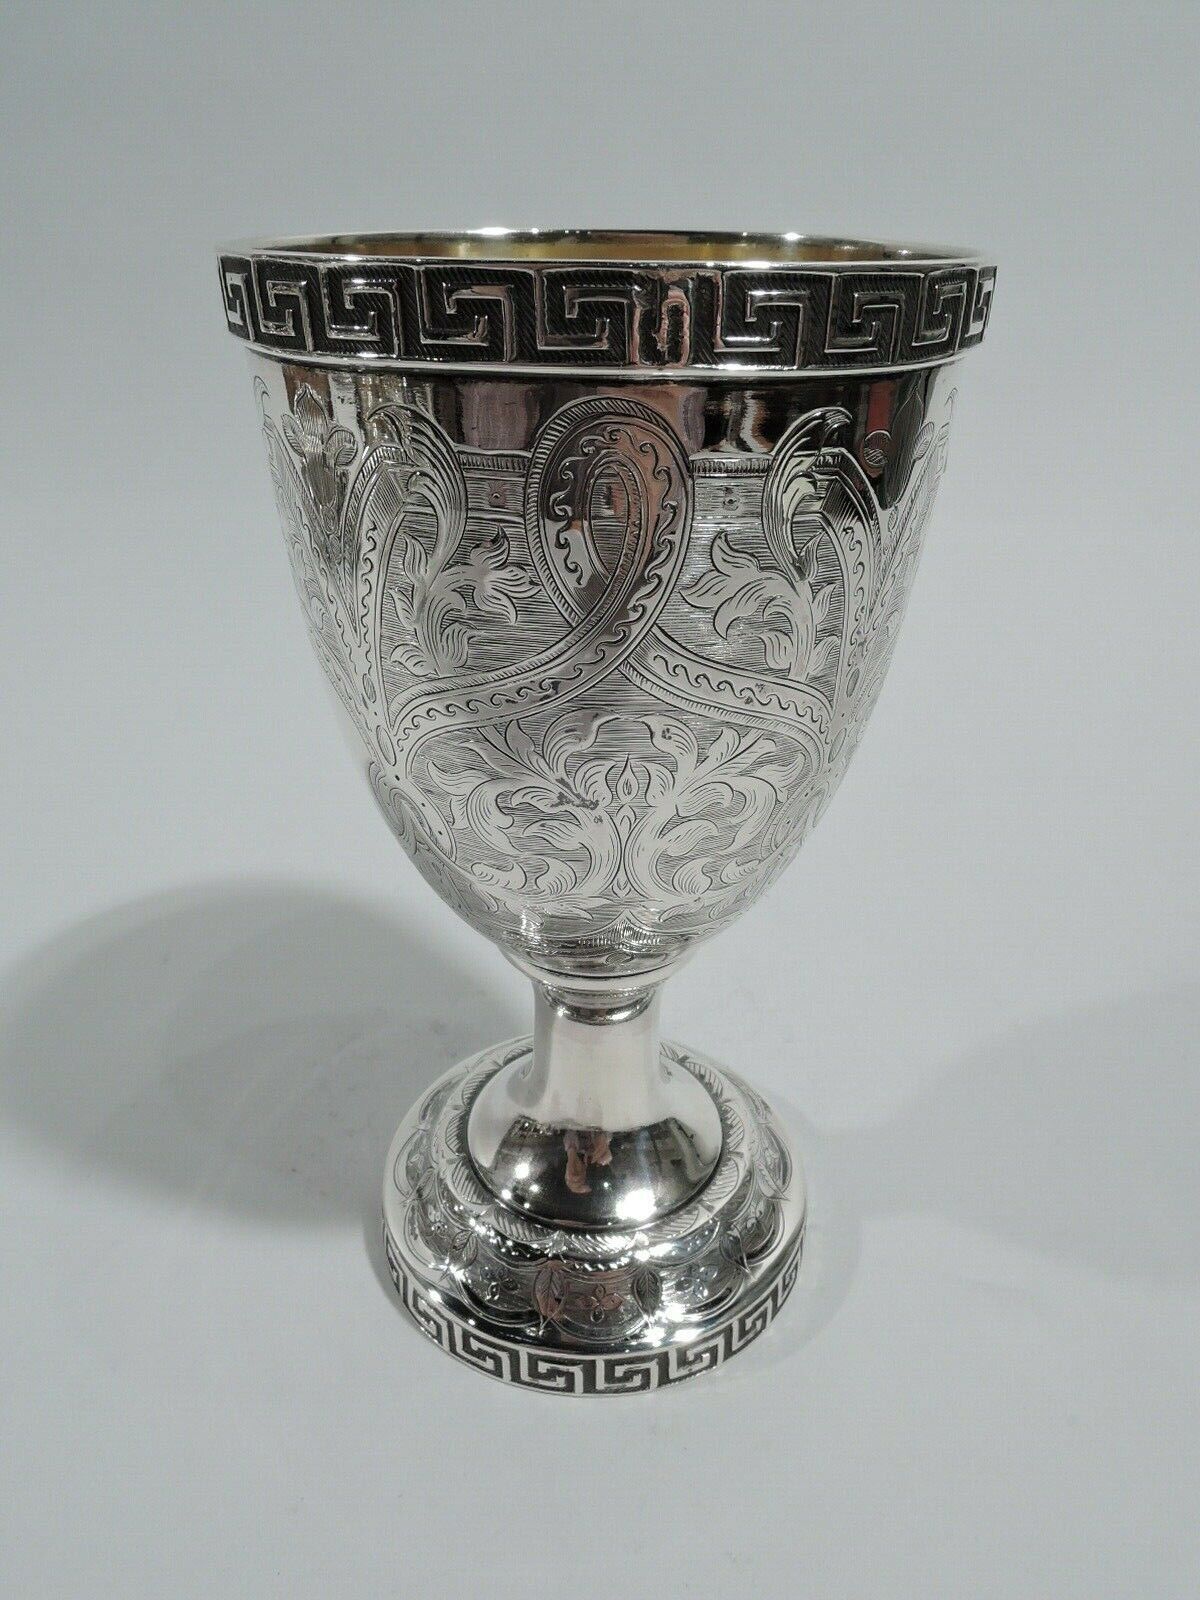 William Gale Goblet Antique Classical New York American Coin Silver C 1860